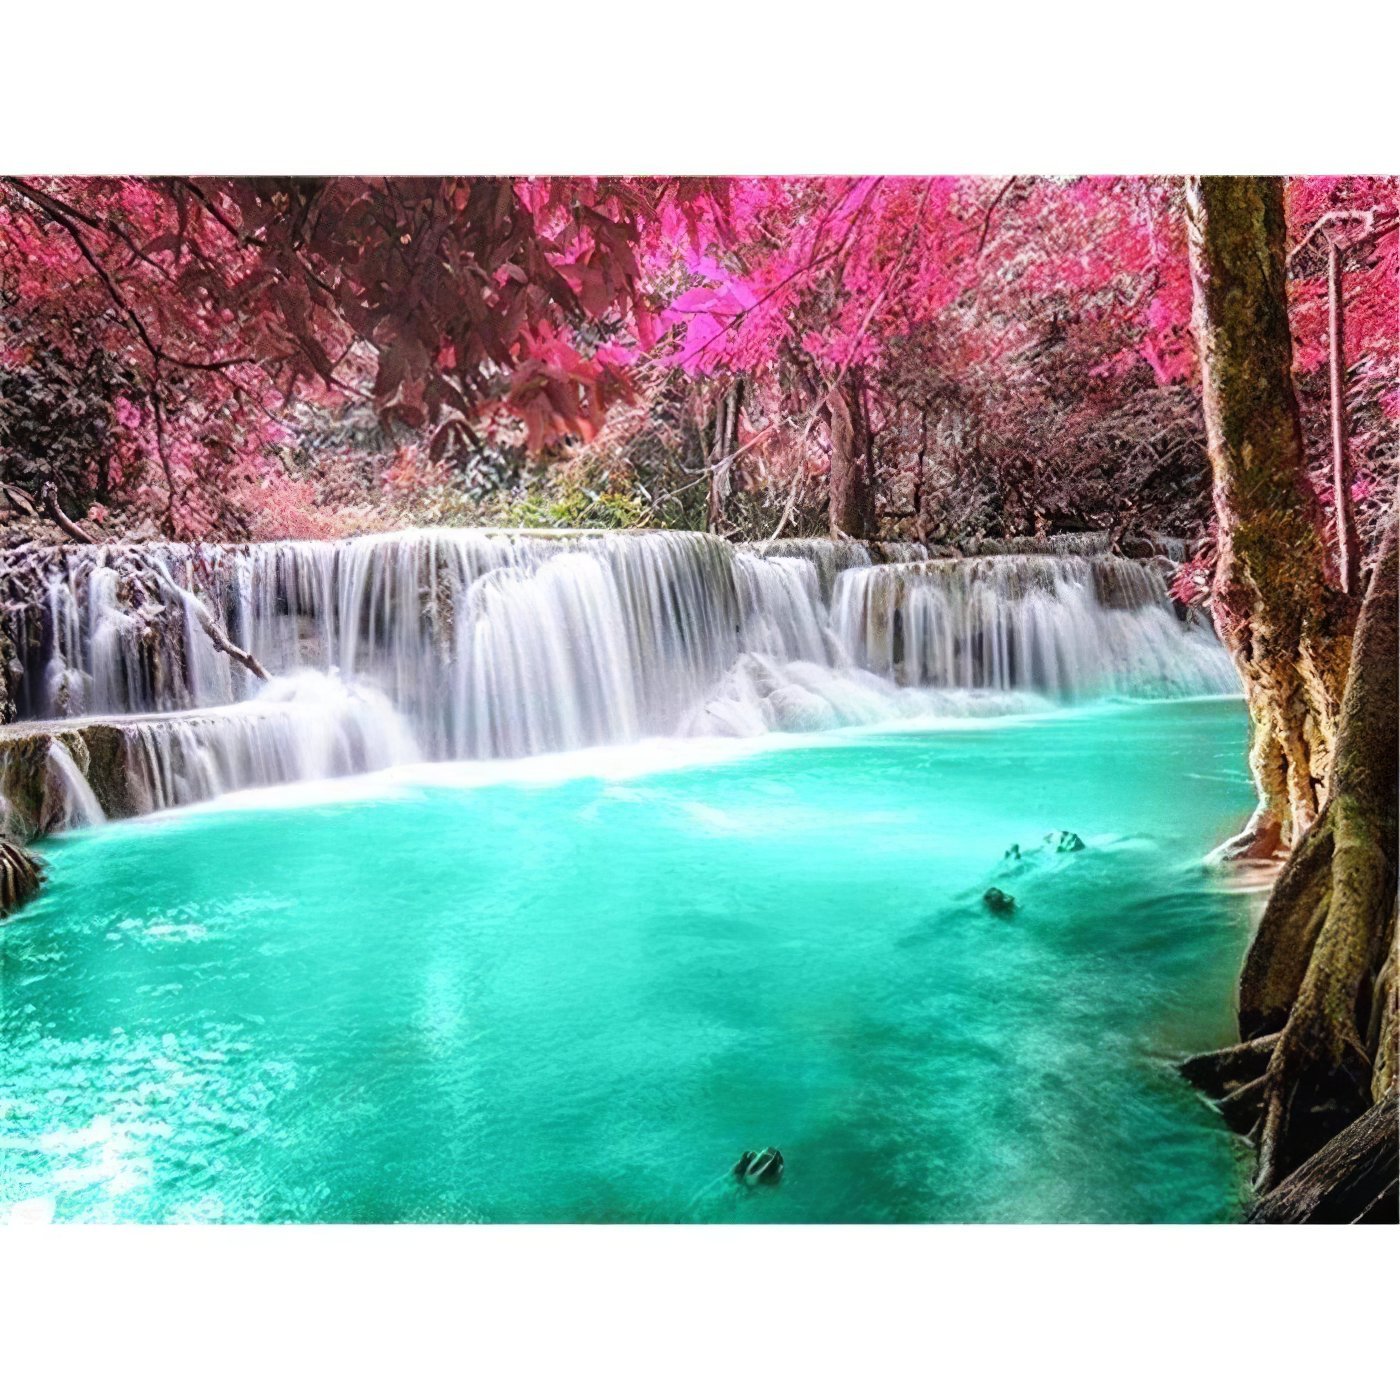 Escape to a cascade beneath blooming rose trees.Fresh Waterfall Under Rose Trees - Diamondartlove